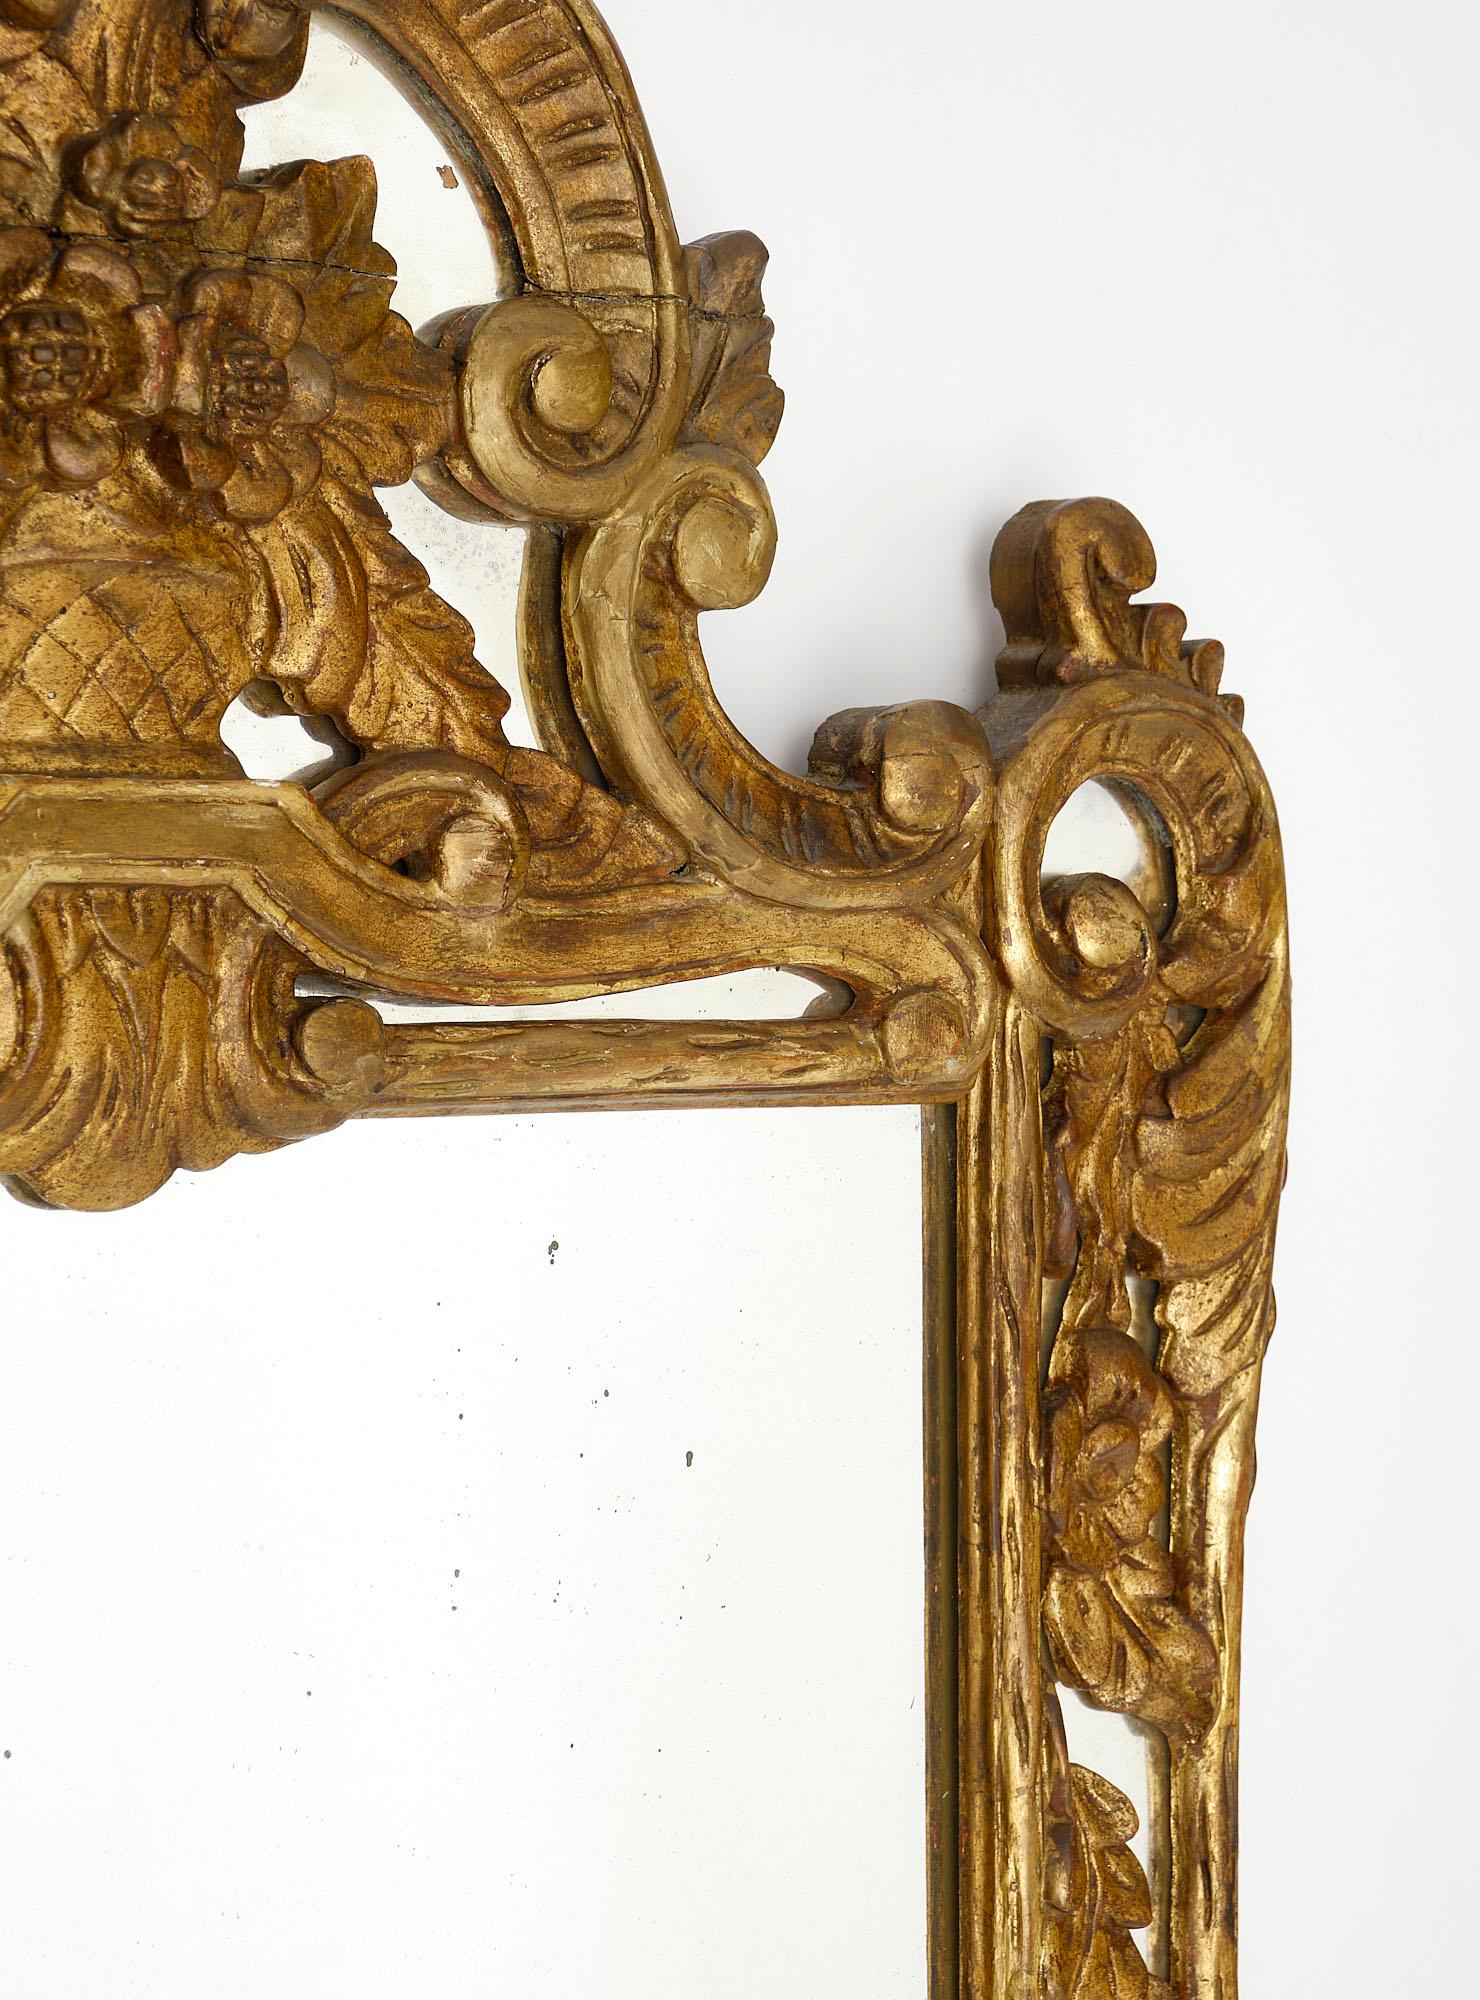 Mirror from France in the Louis XIV style. This “Pareclose” mirror is covered in rich 23 carat gold leafing throughout and features interlacing designs of flowers and leaves throughout. The mirror is all original to this piece.